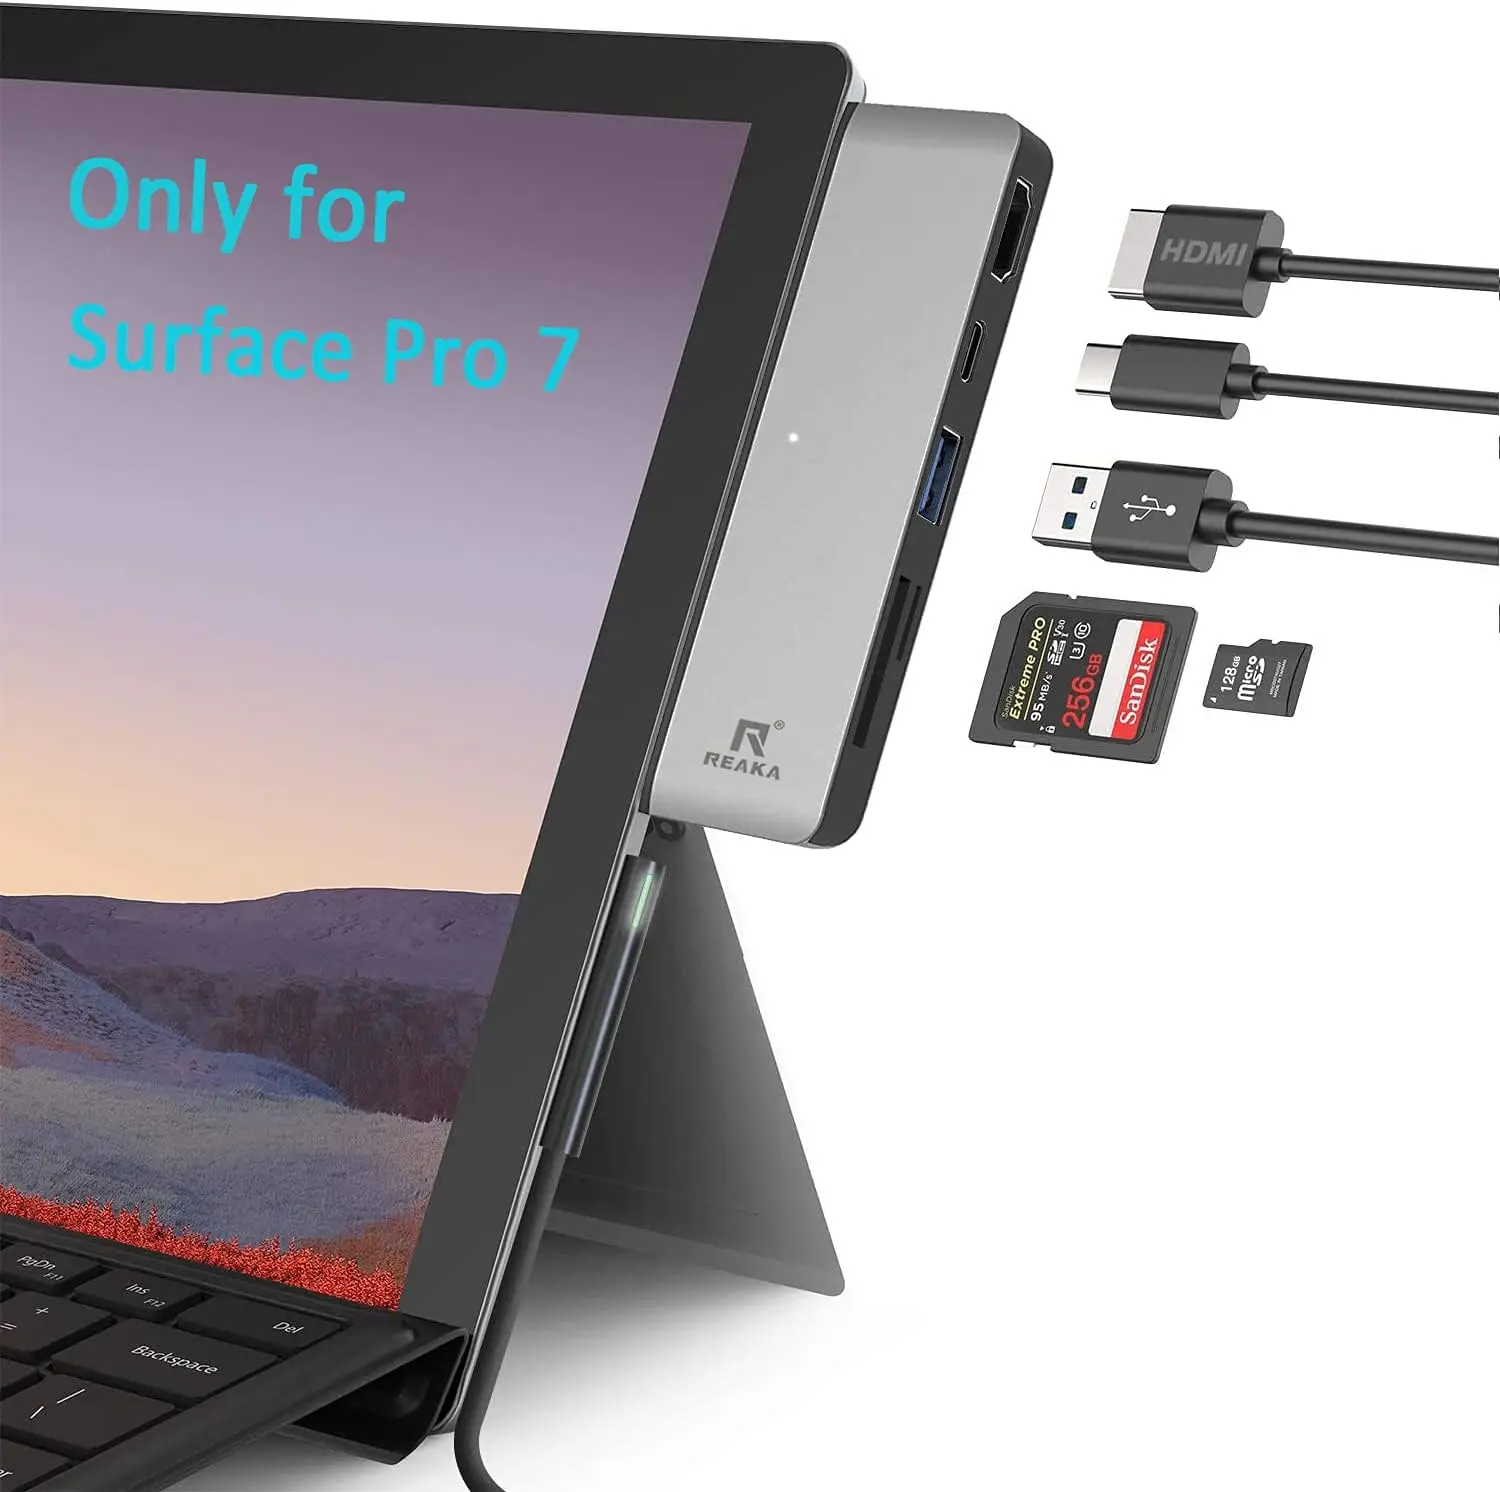 

Surface Pro 7 USB C Hub 5-in-2 Surface Pro Adapter Docking Station with 4K HDMI USB C 60W PD Charging, USB 3.0, SD/TF